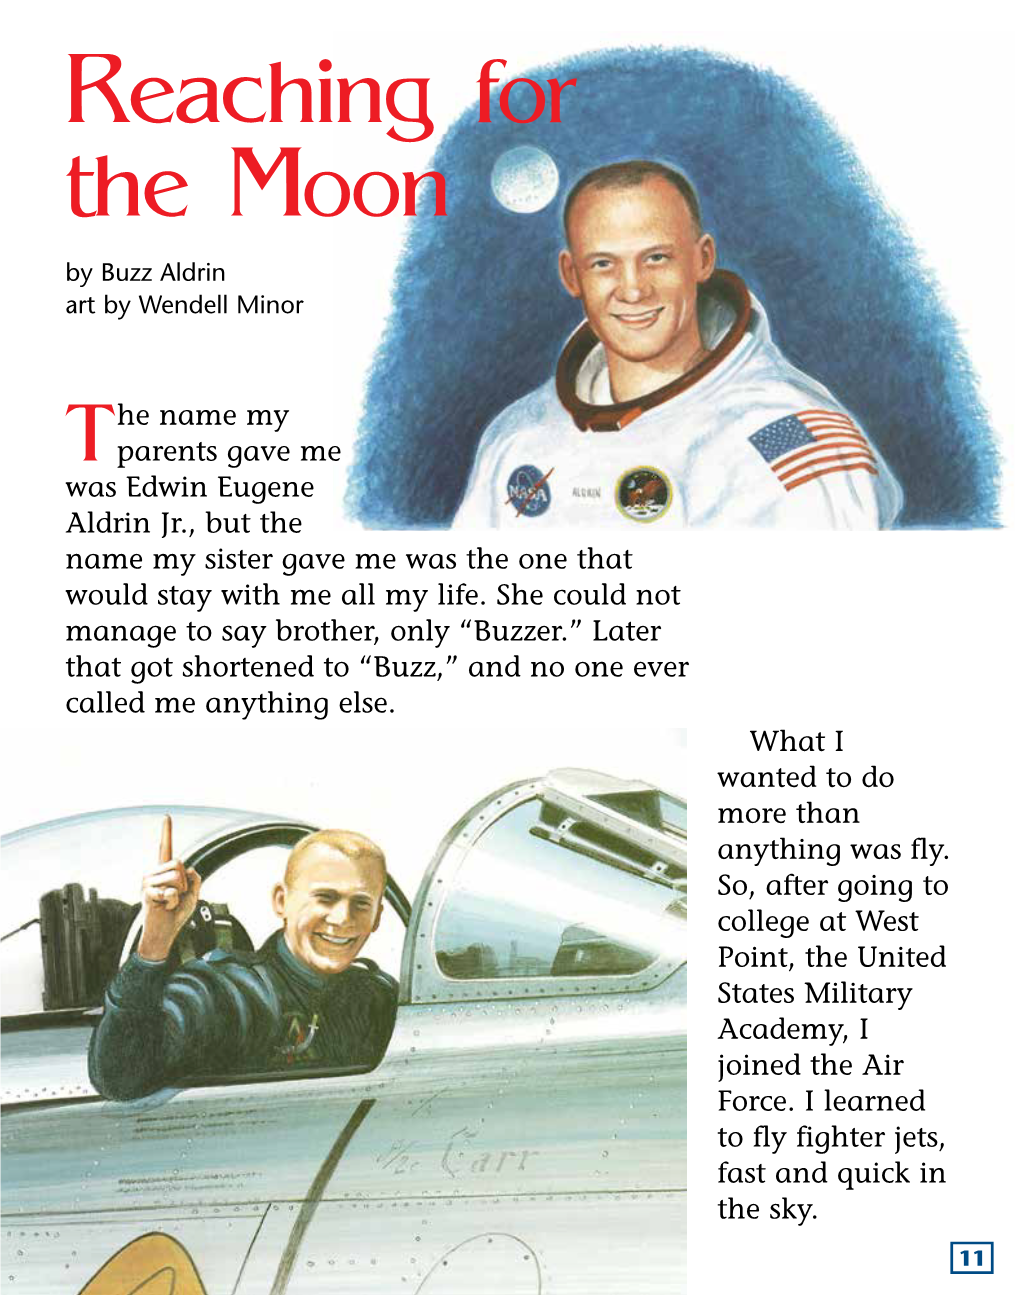 Reaching for the Moon by Buzz Aldrin Art by Wendell Minor